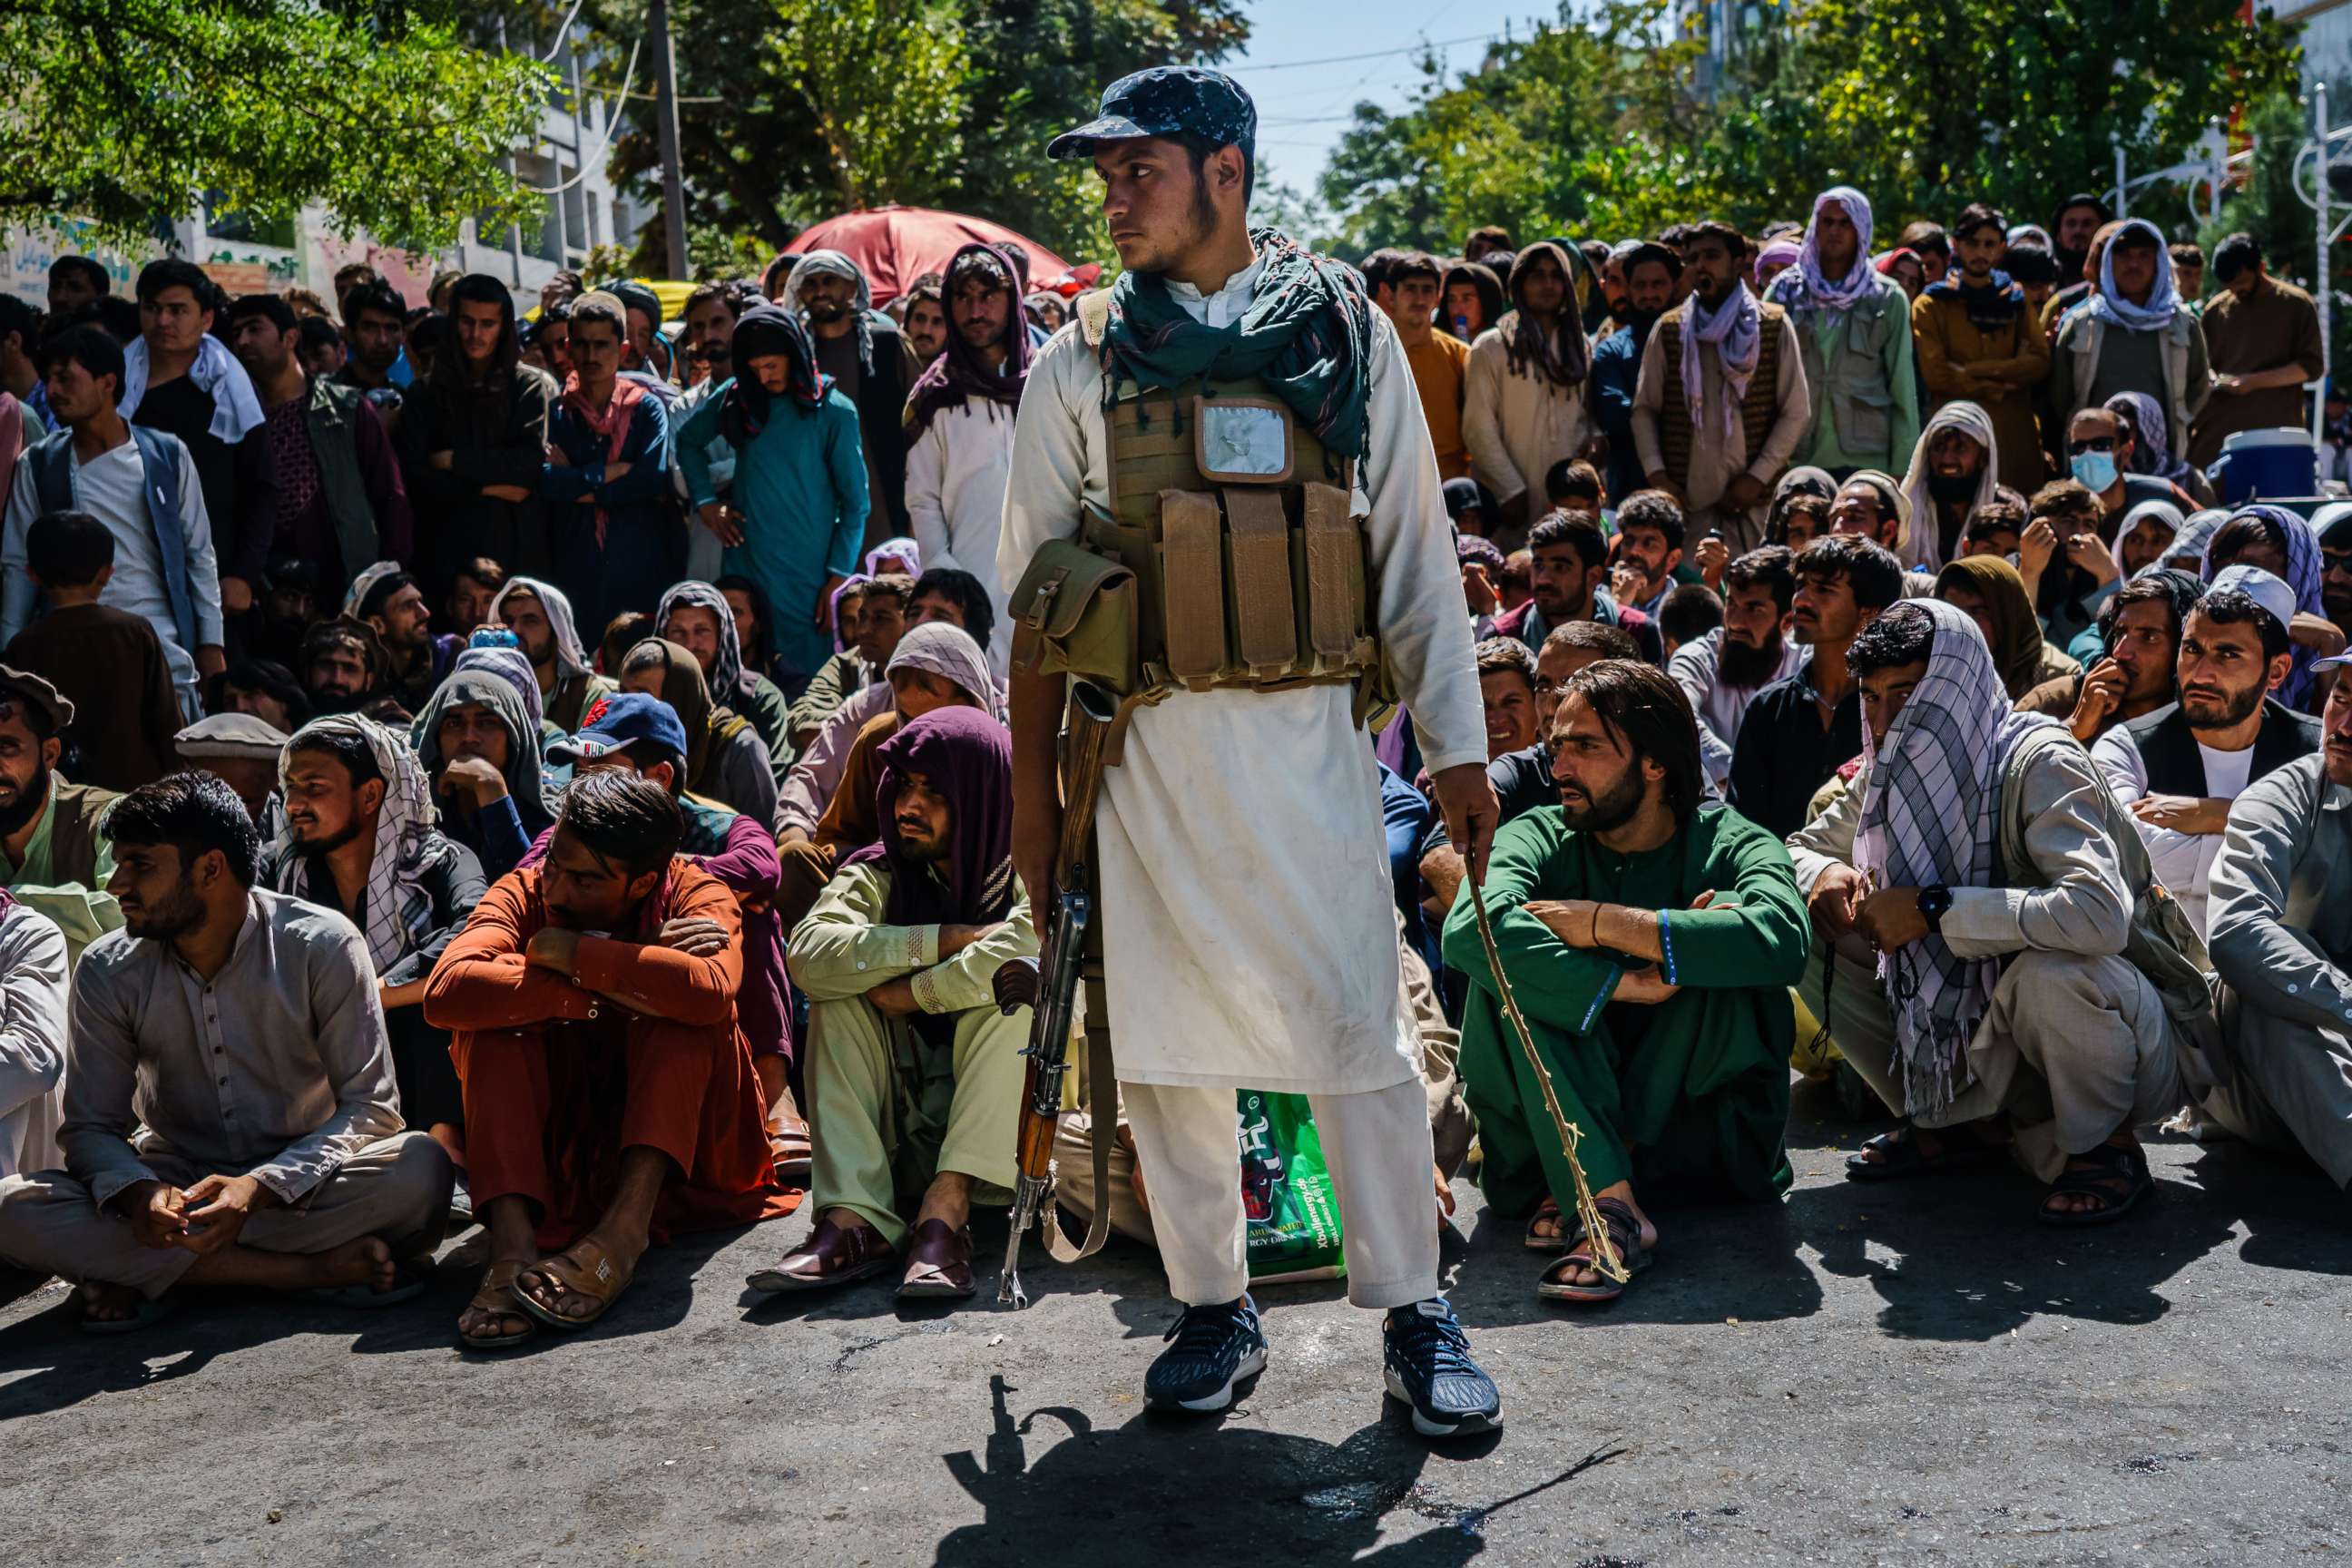 PHOTO: Guarded by Taliban militants, hundreds of Afghans are made to sit in the sweltering heat to withdraw money from the banks that are slowly reopening after Taliban took control of the country, in Kabul, Afghanistan, Sept. 5, 2021.